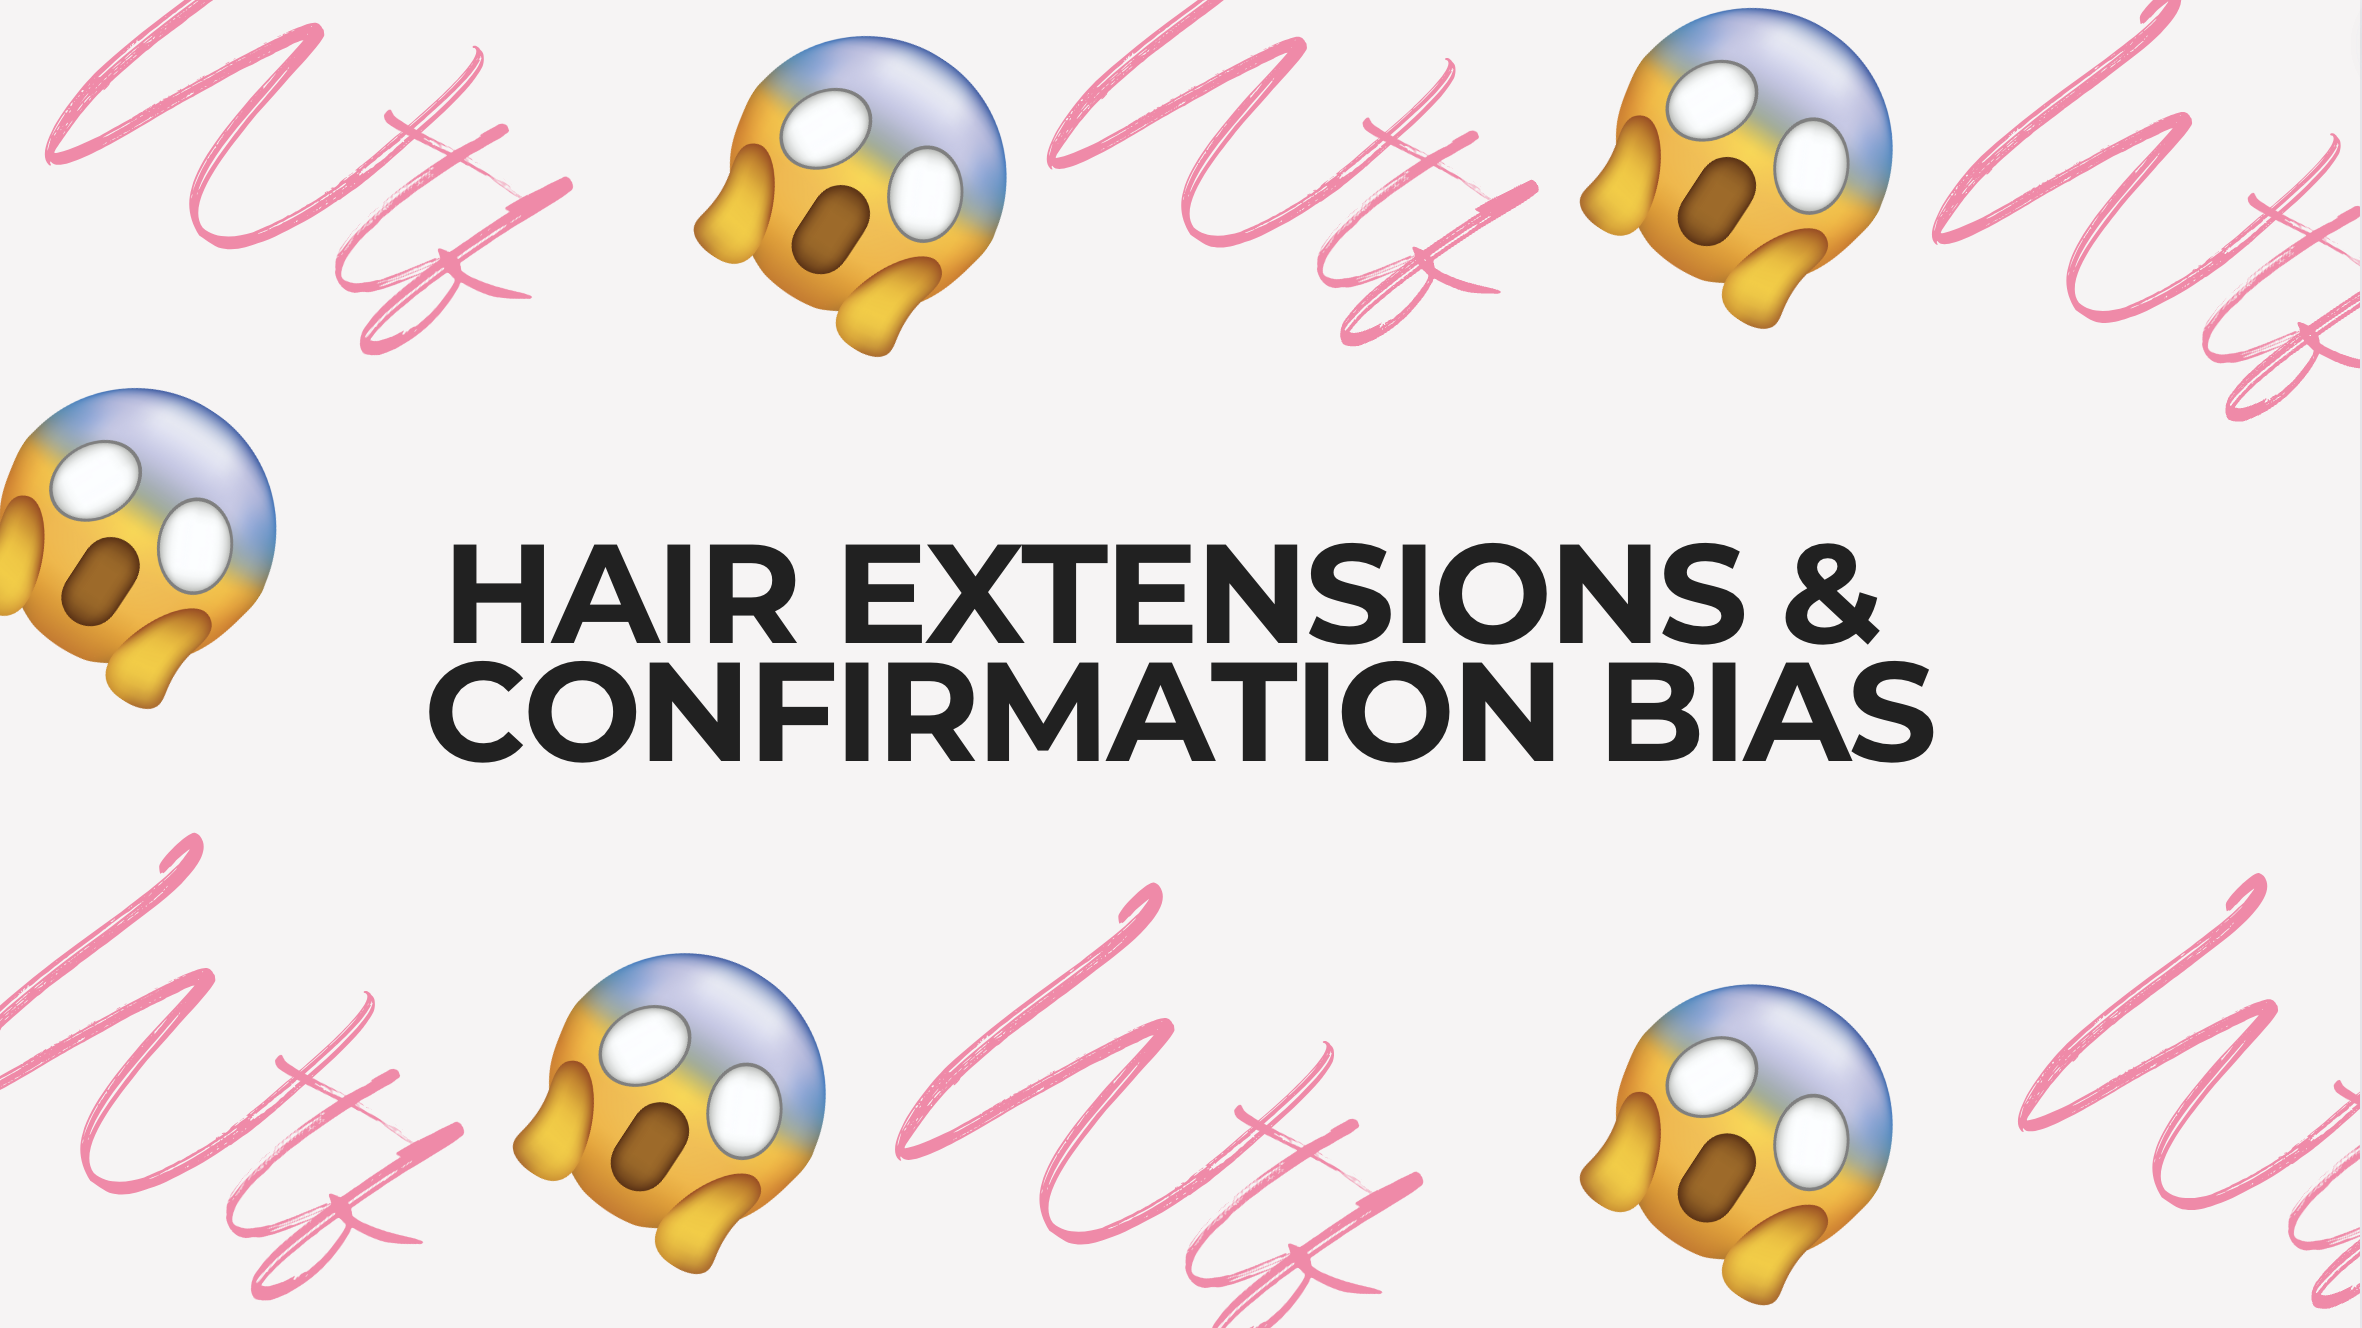  Hair Extensions and Confirmation Bias: Are We Seeing What We Want To See? 